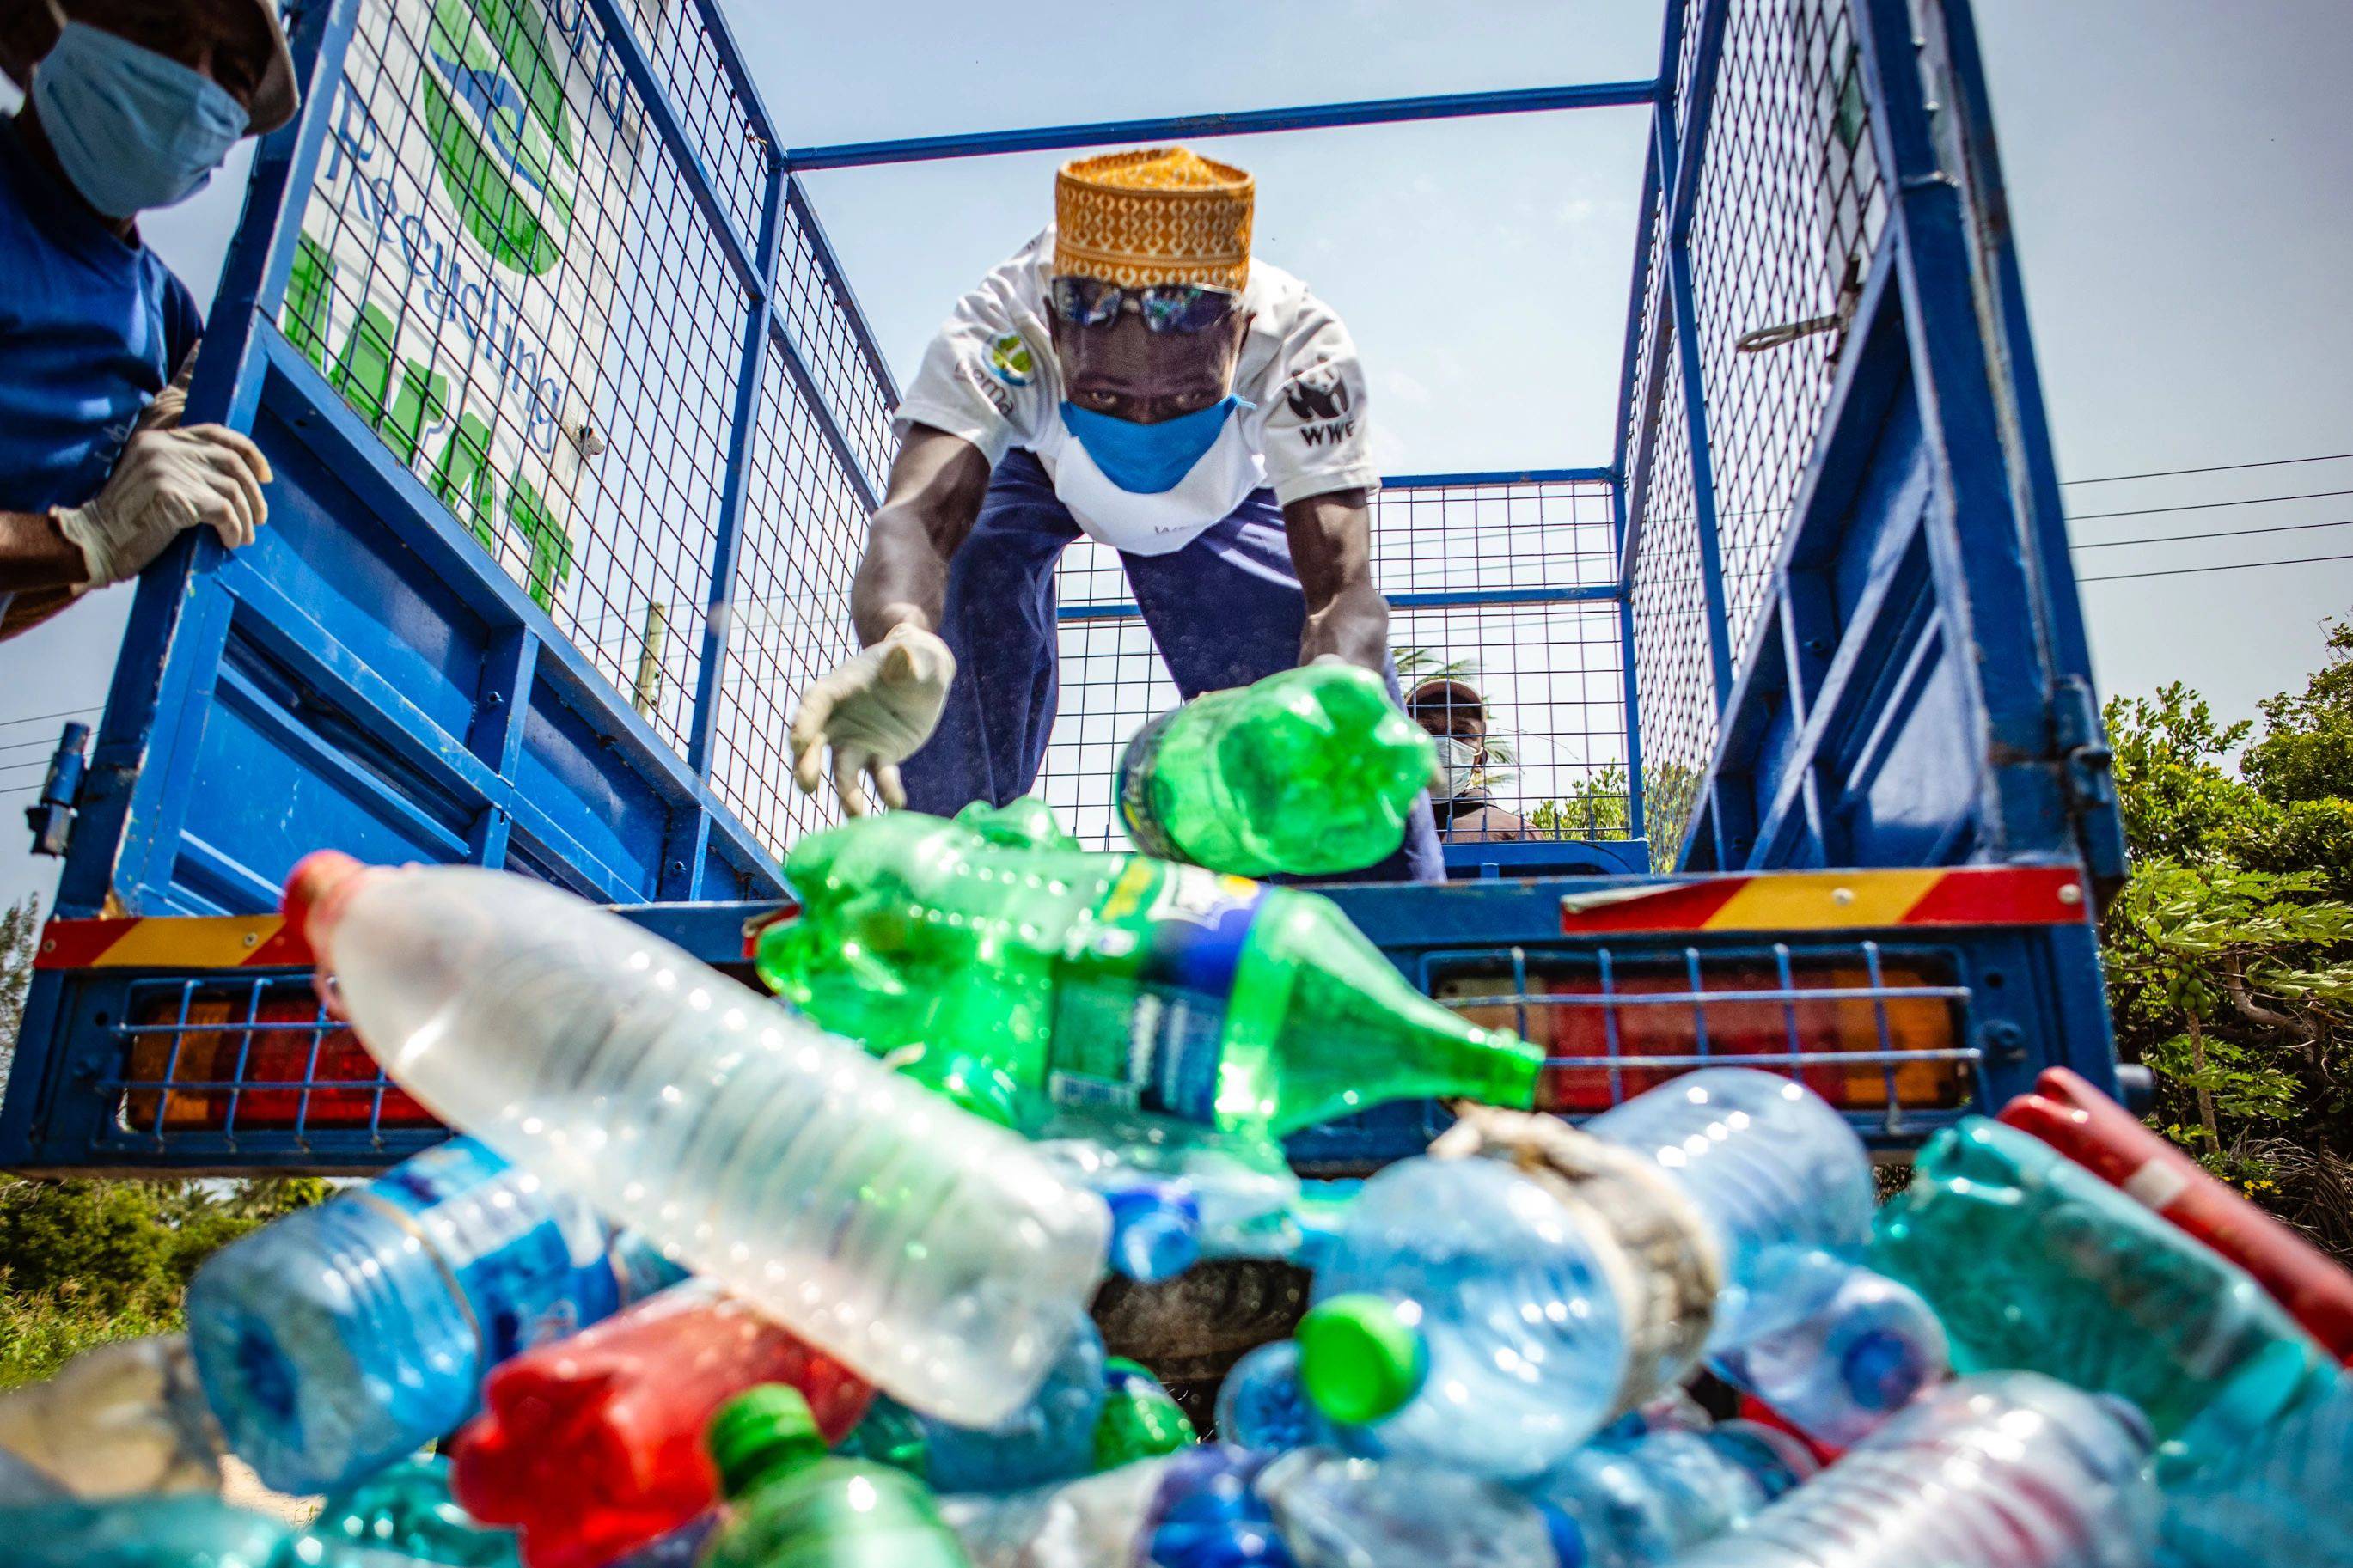 a person unloading plastic bottles from the back of a truck